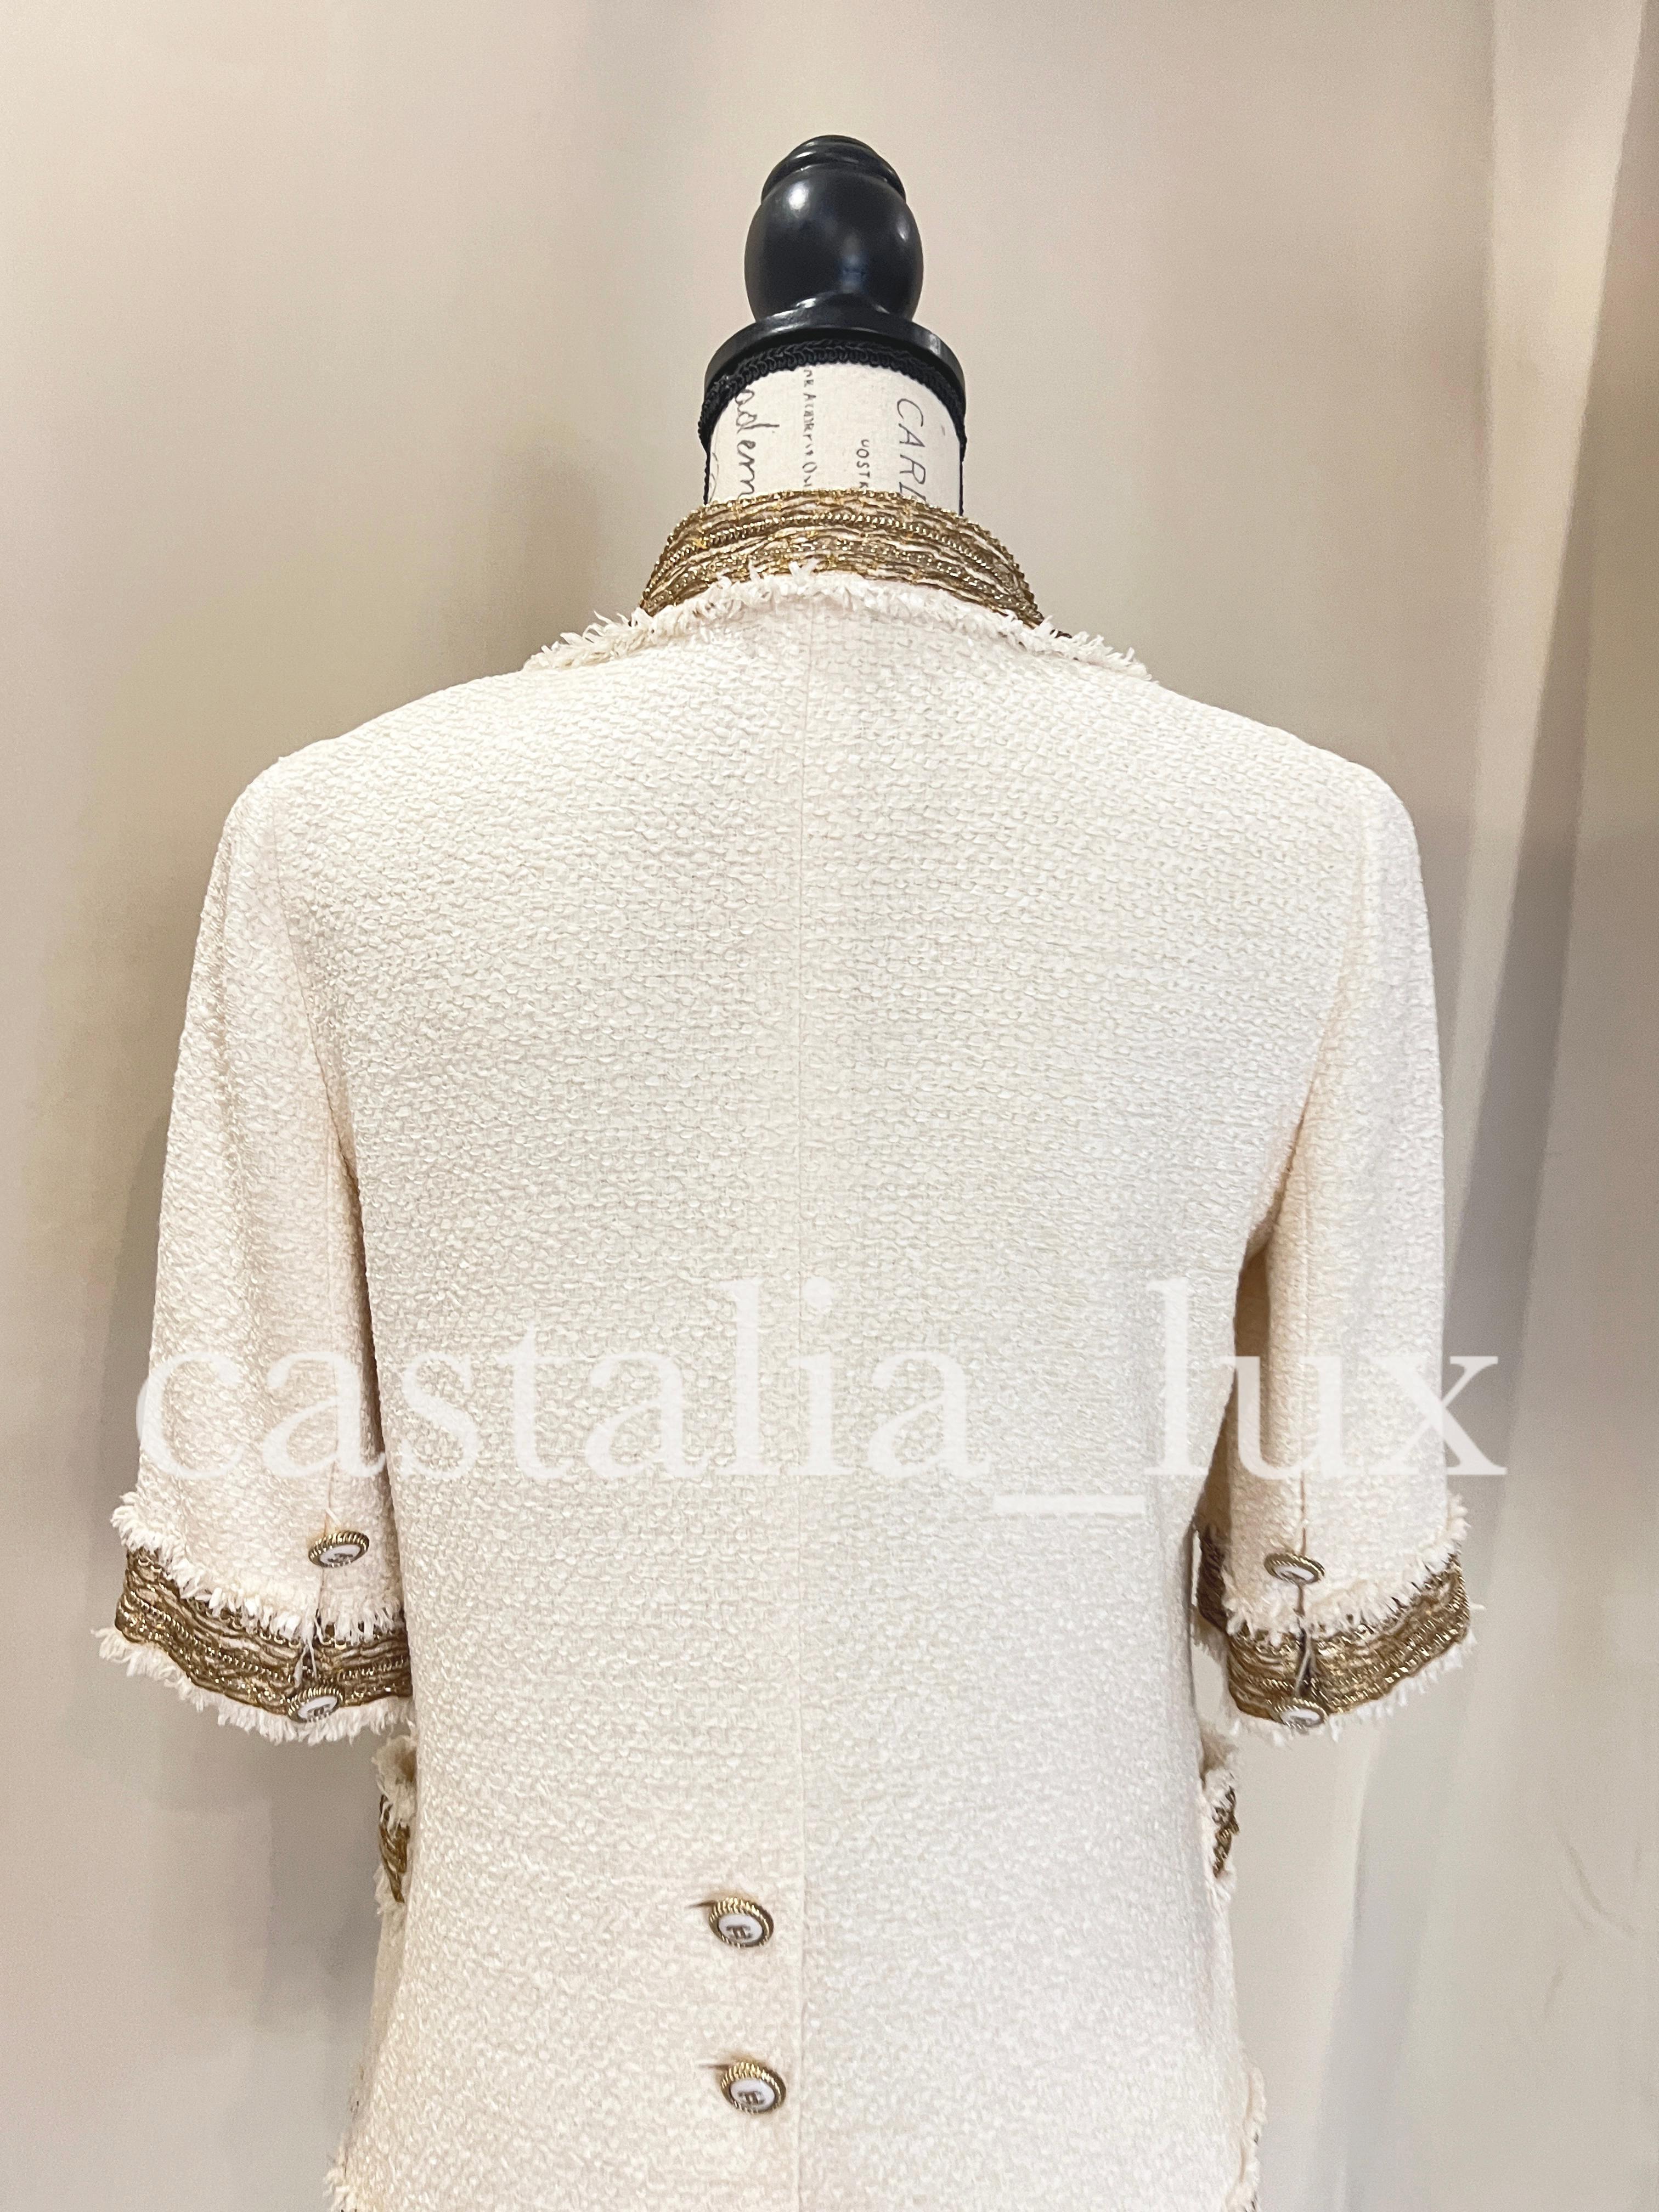 Chanel New Super Rare Chain Embellished Tweed Jacket 6